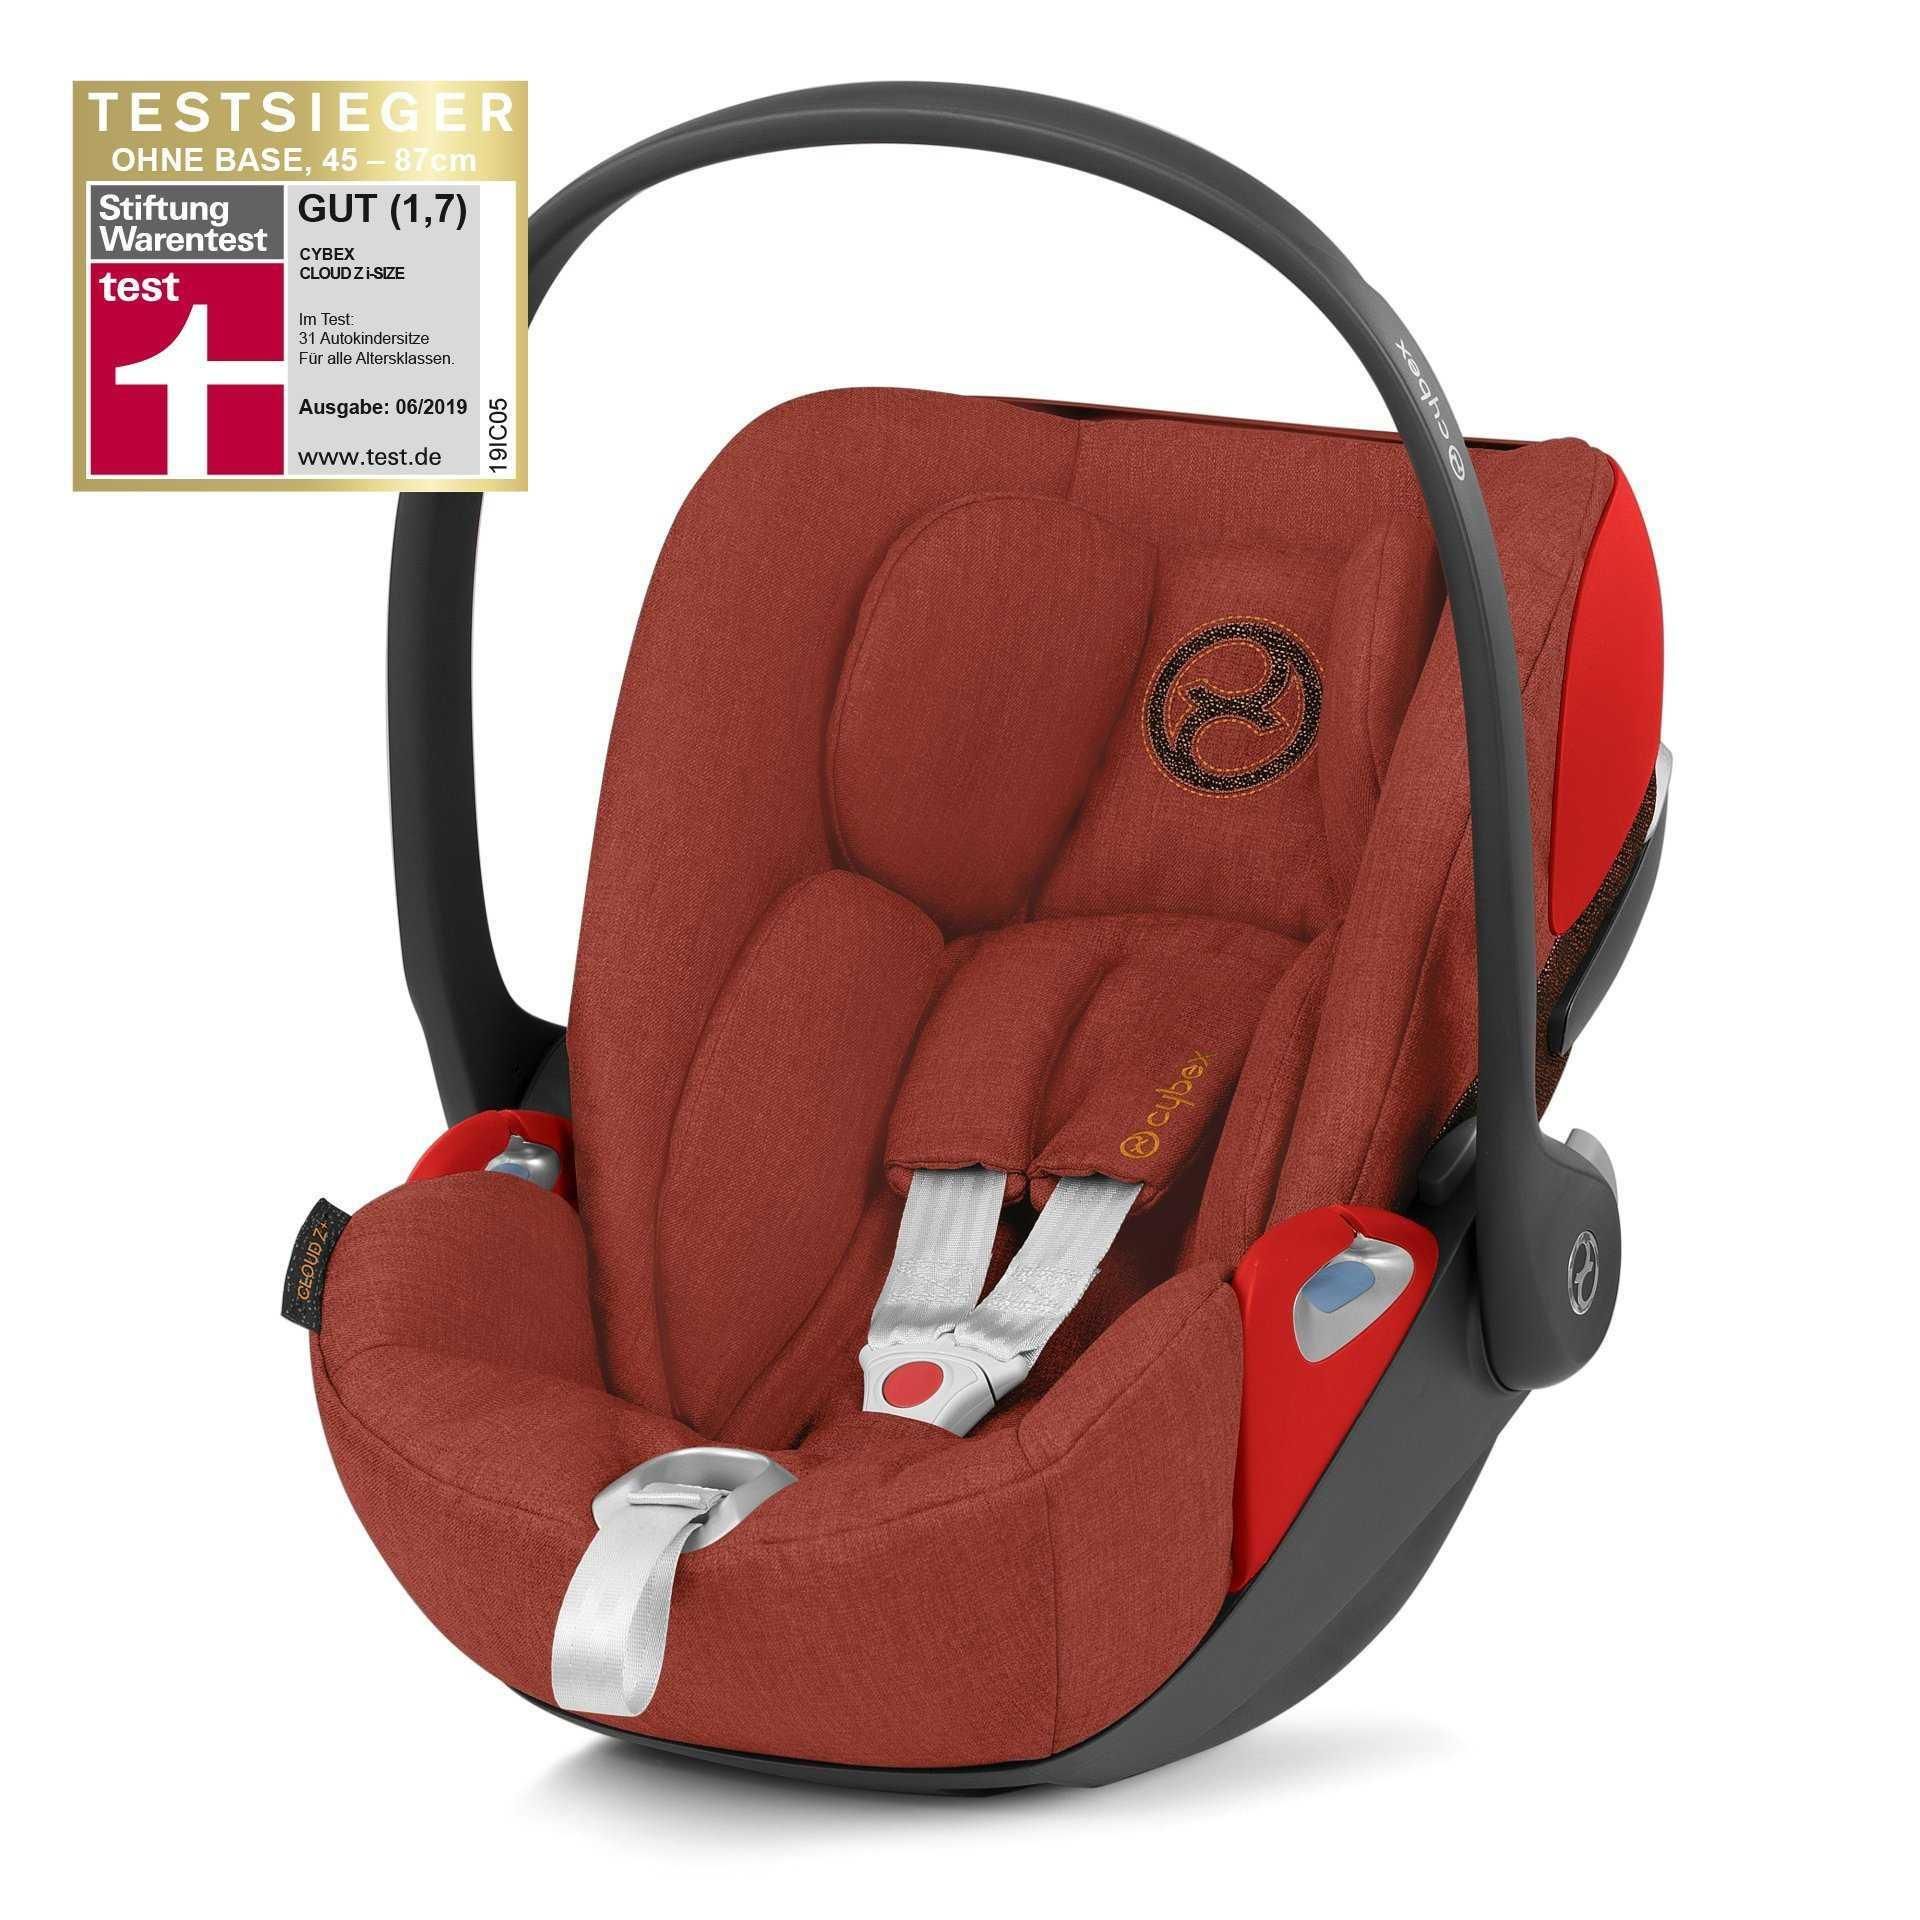 Rrp £170 Cybex Platinum Autumn Gold And Burnt Red In Car Children'S Safety Seat - Image 2 of 2